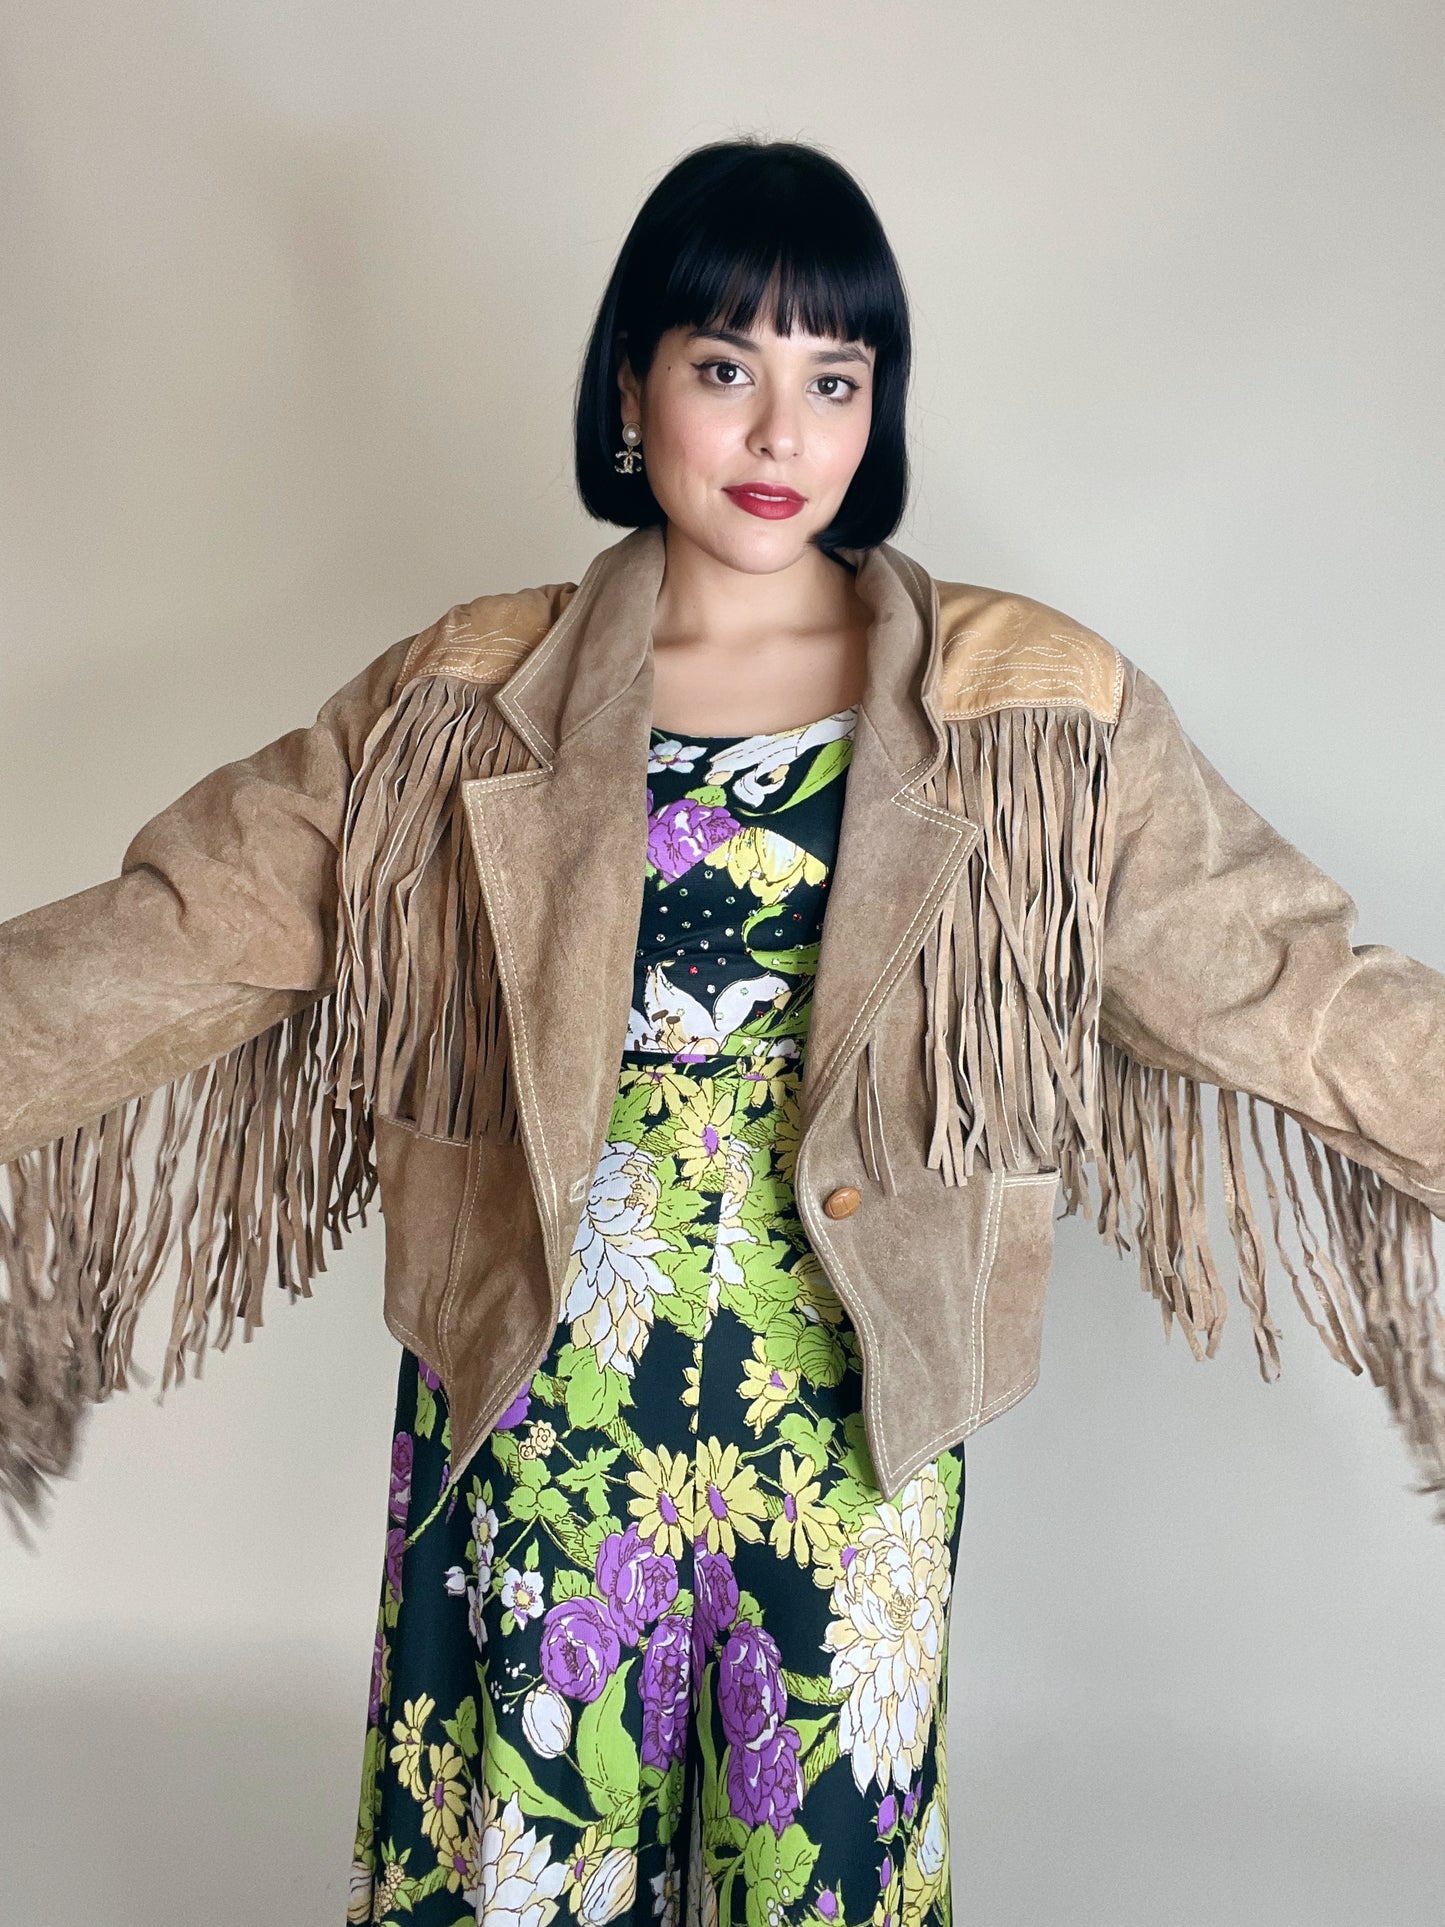 Vintage 70s "Moose Lake Lodge by Avanti" Tan Suede and Leather Jacket with Fringe Best Fits Sizes S-XL